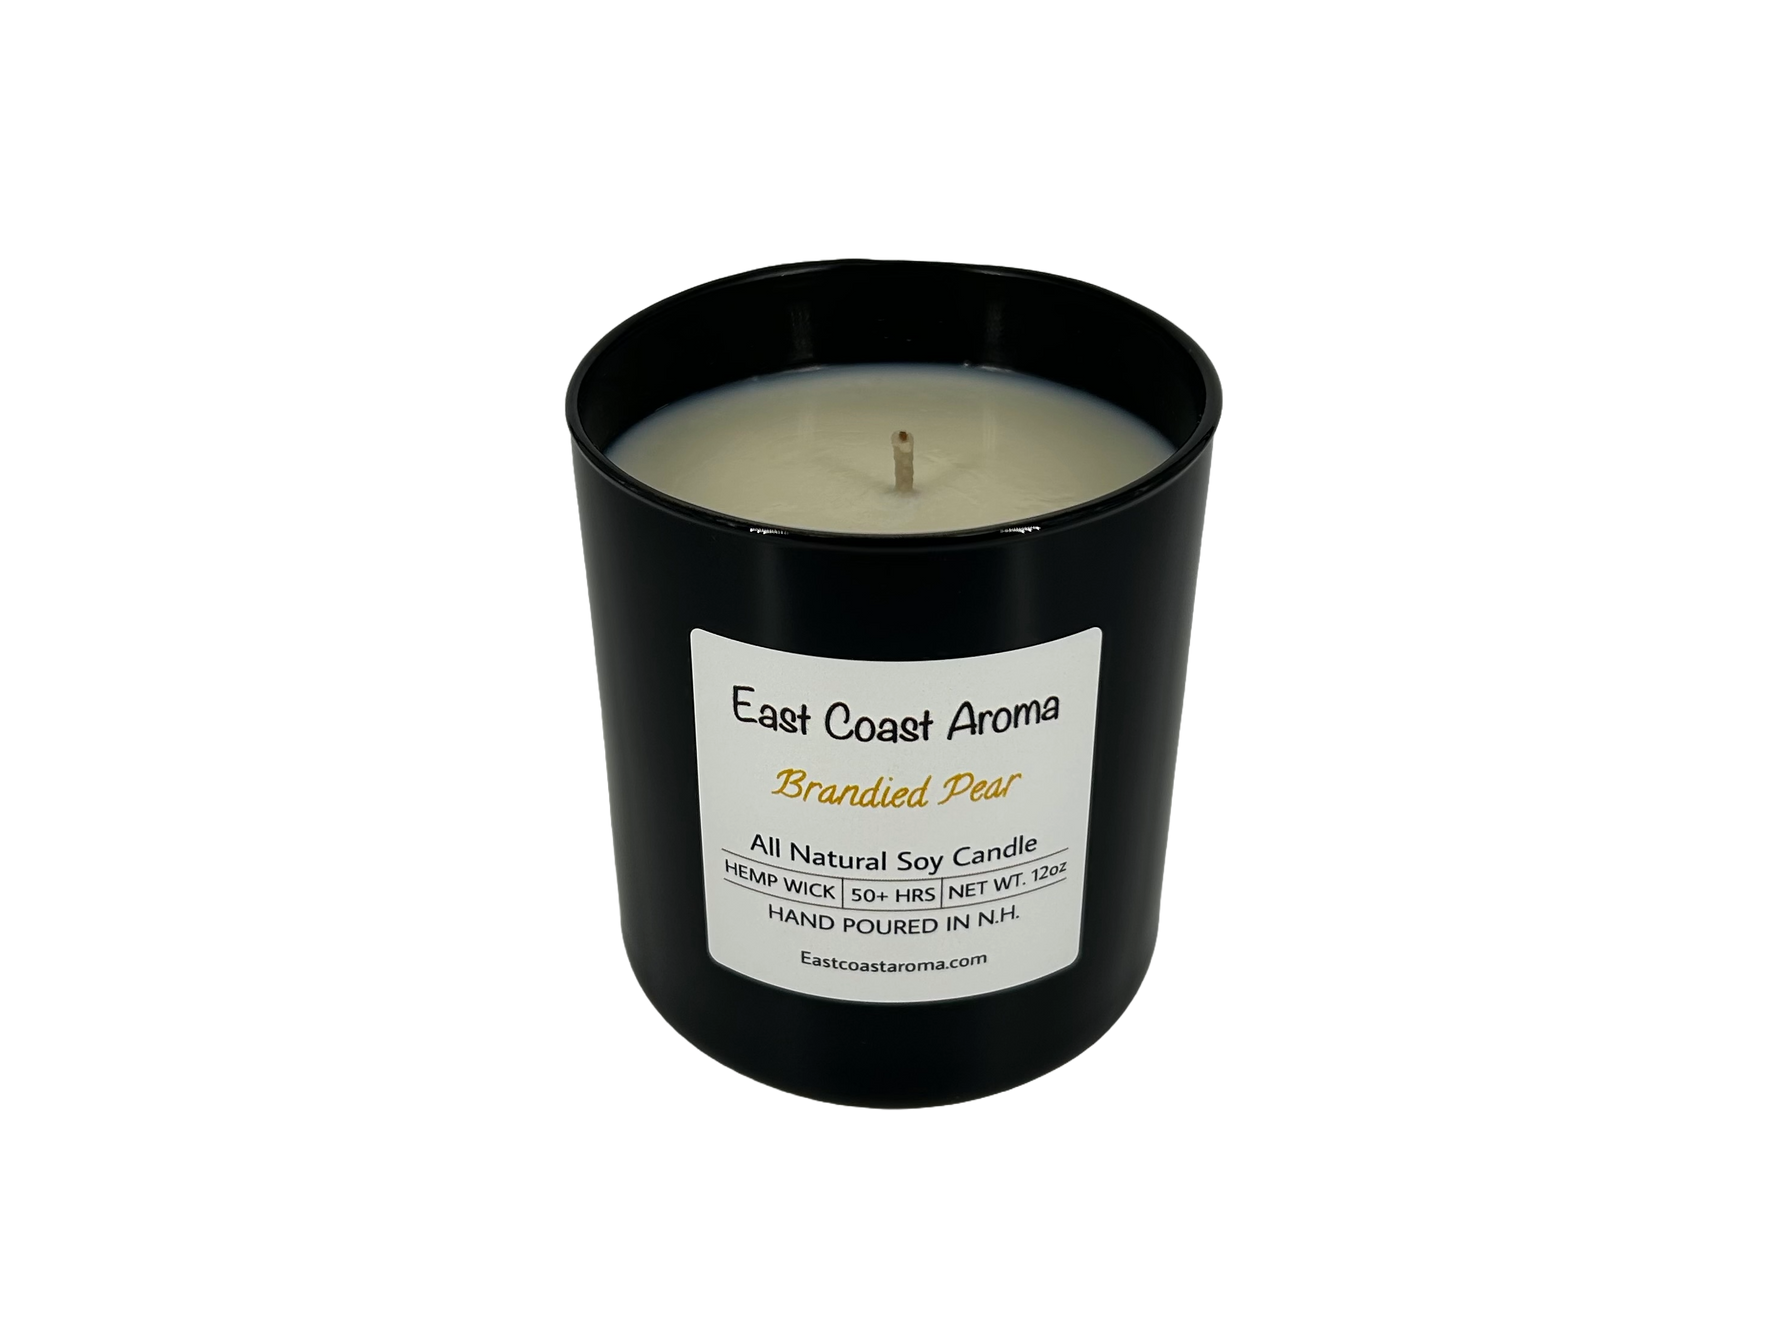 12oz Brandied Pear Soy Candle